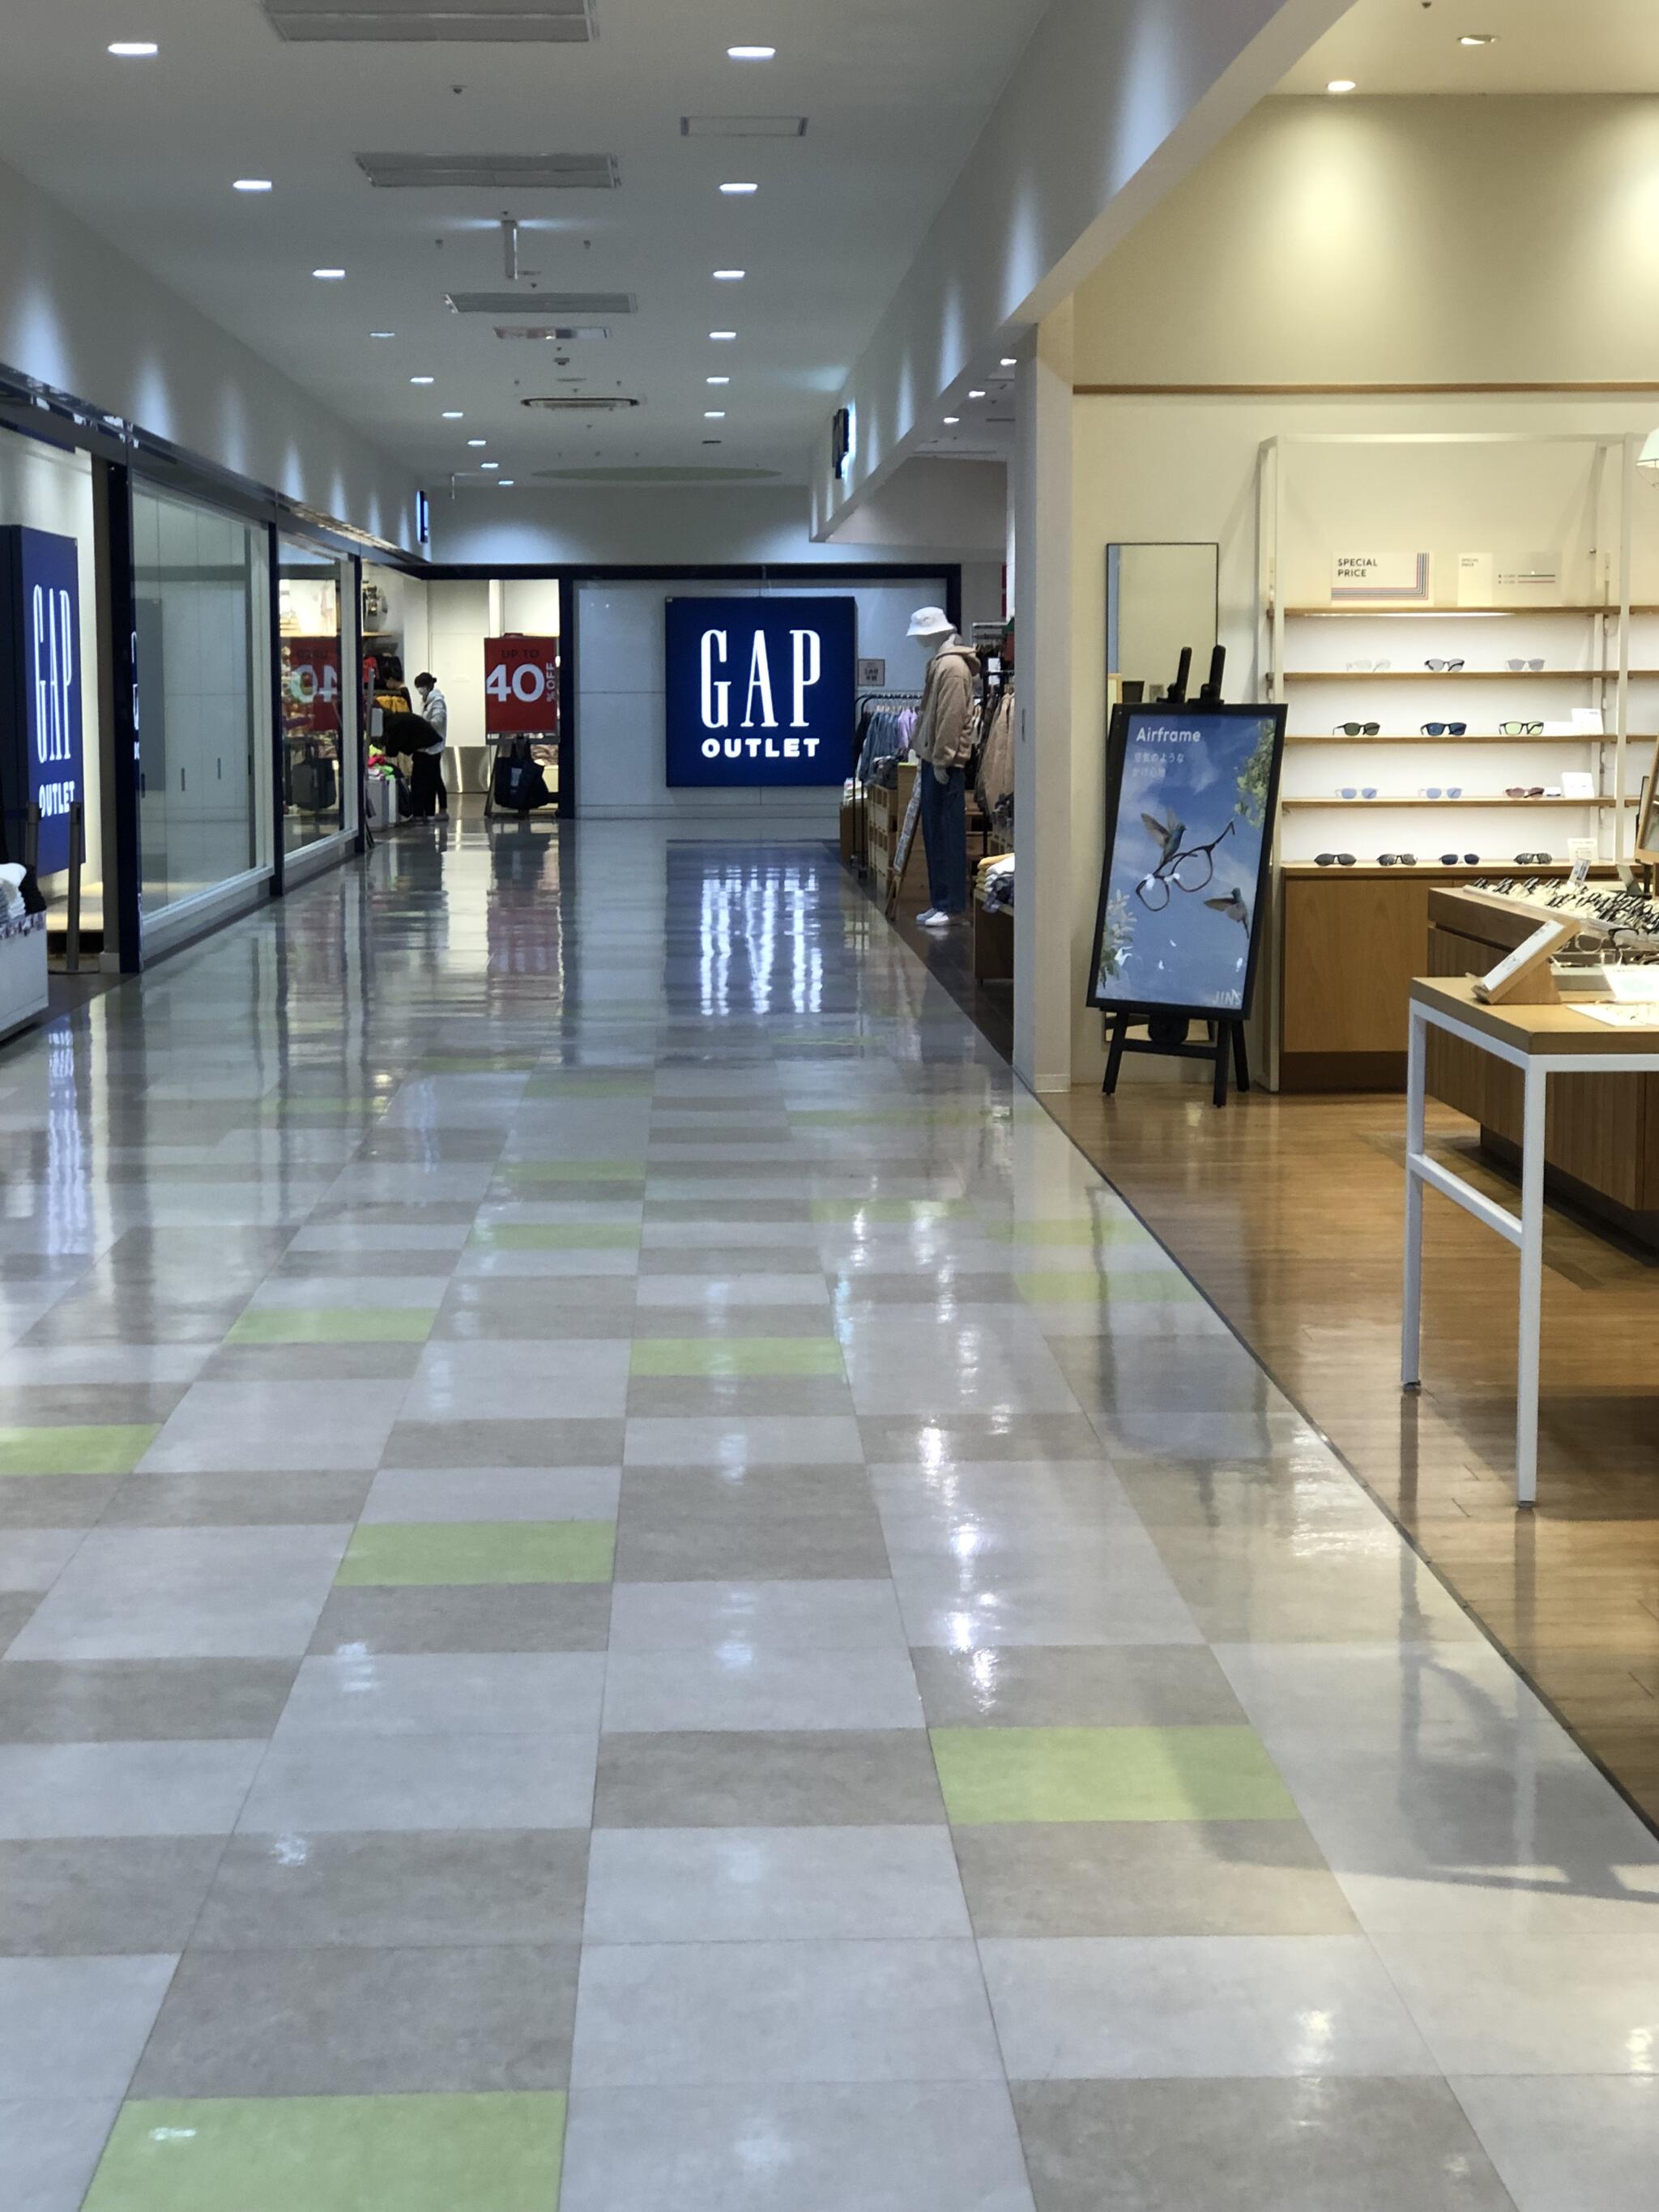 GAP Outlet 島忠ホームズ草加舎人店の代表写真5